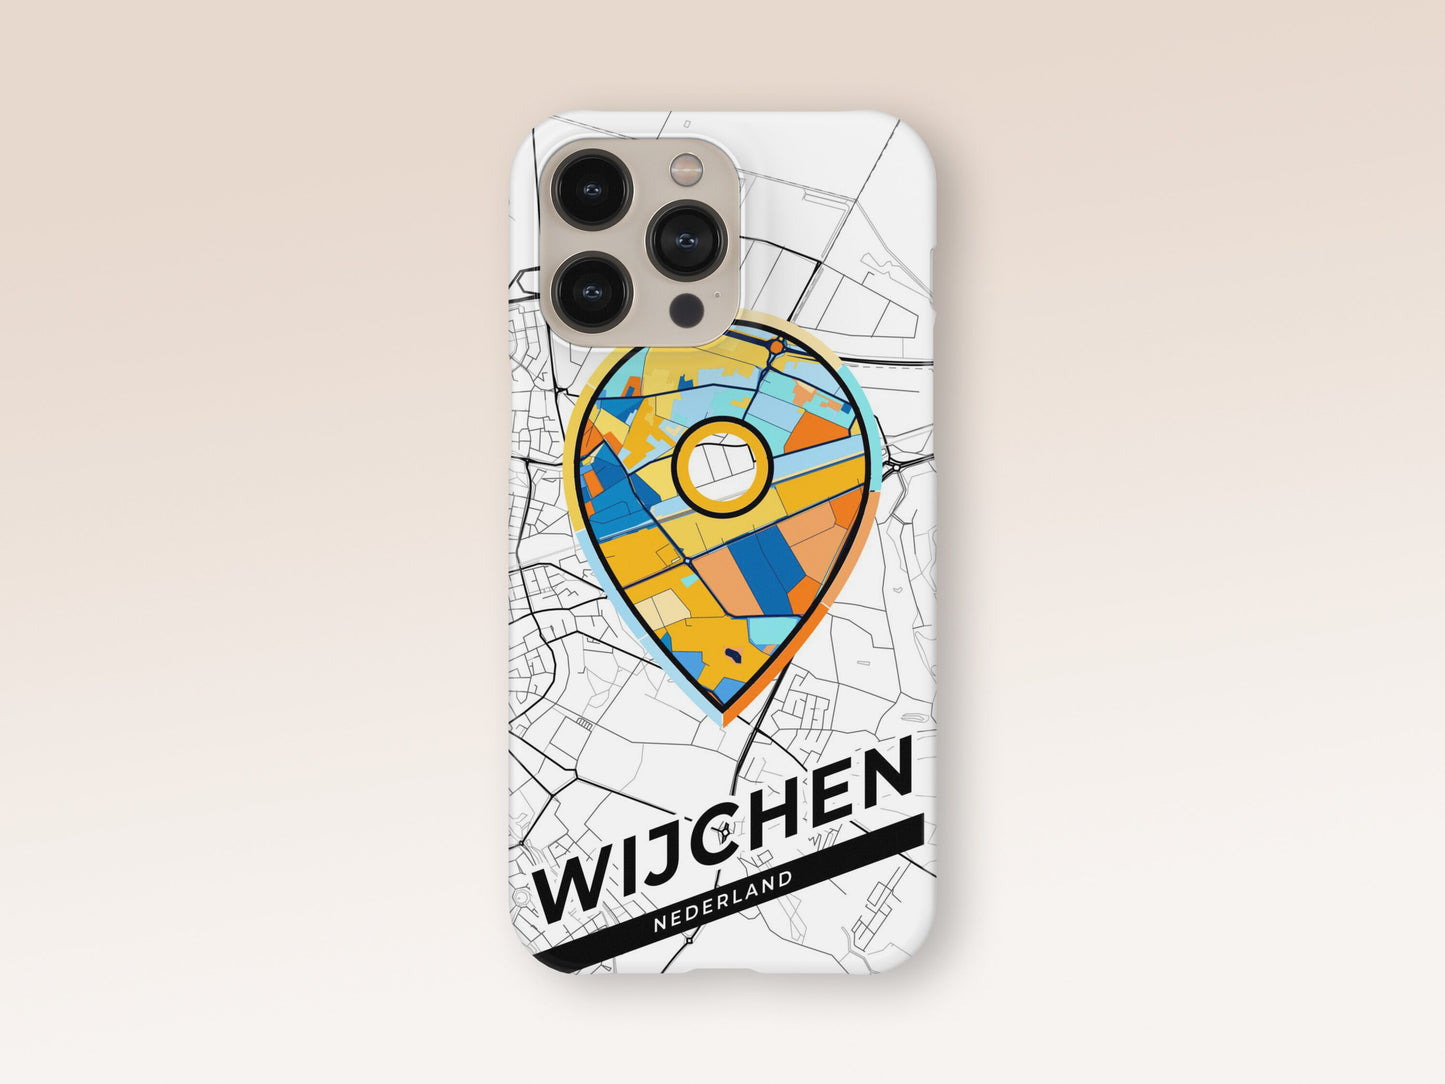 Wijchen Netherlands slim phone case with colorful icon 1